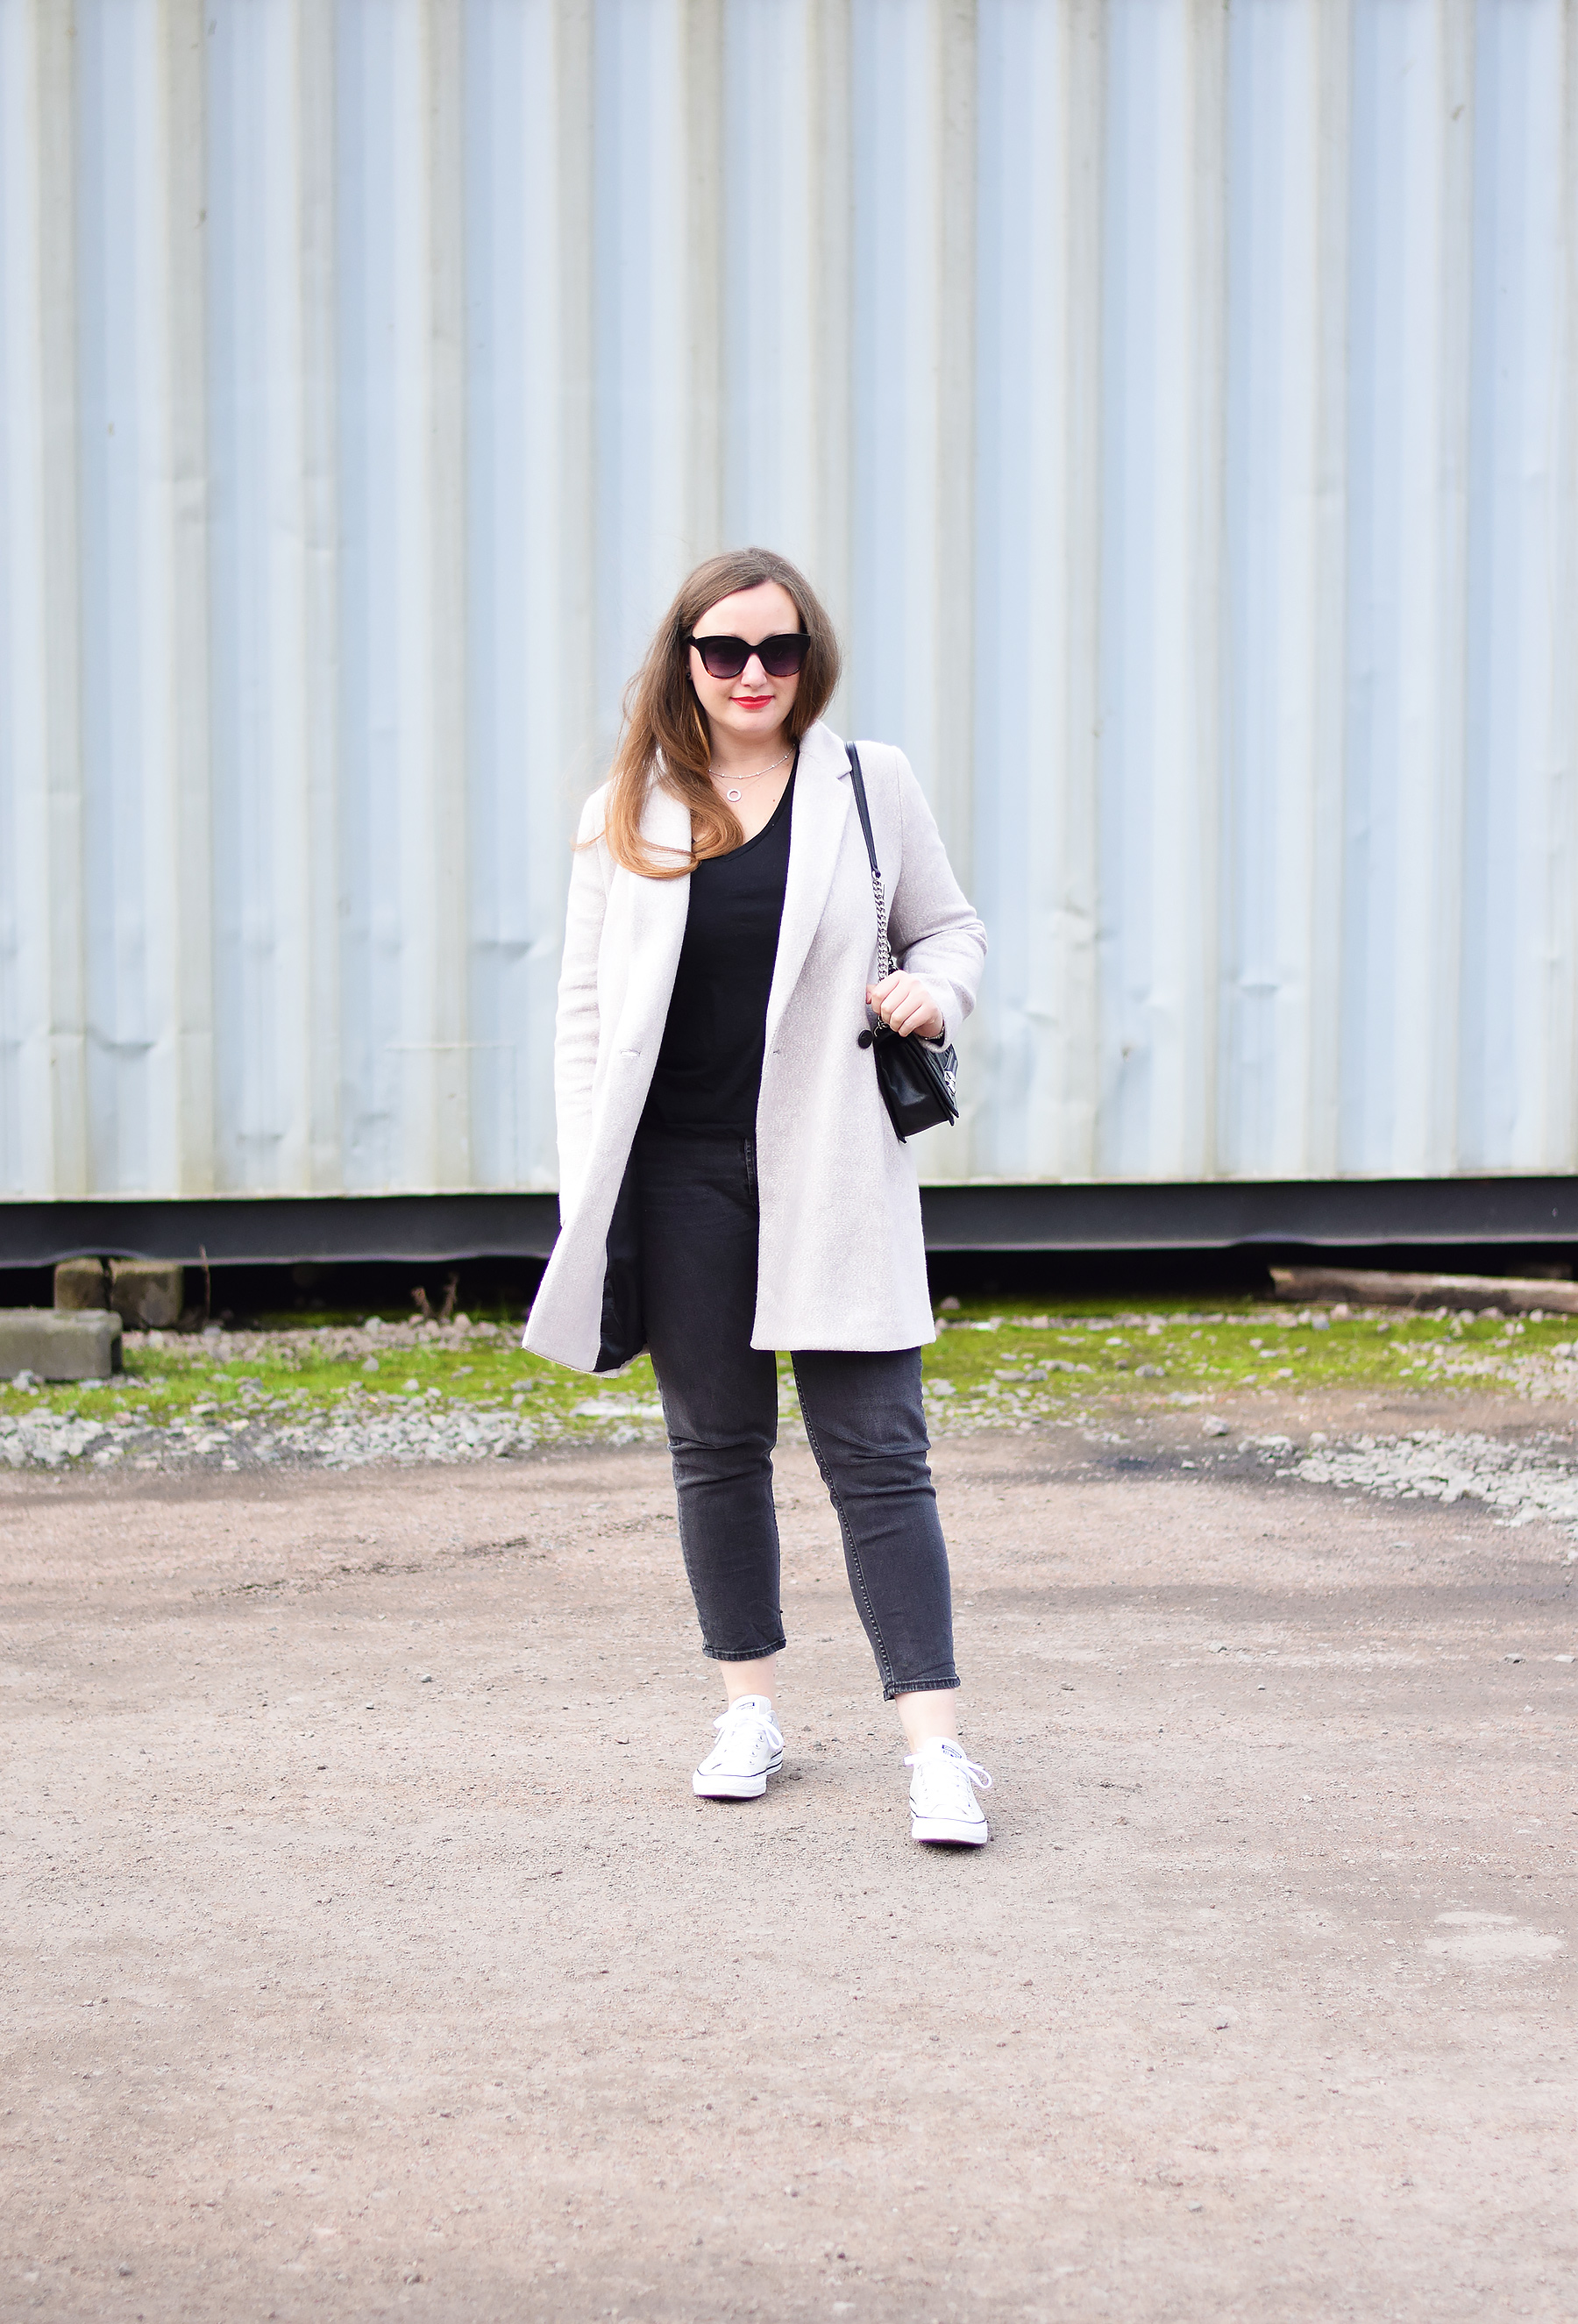 Black and light grey outfit ideas